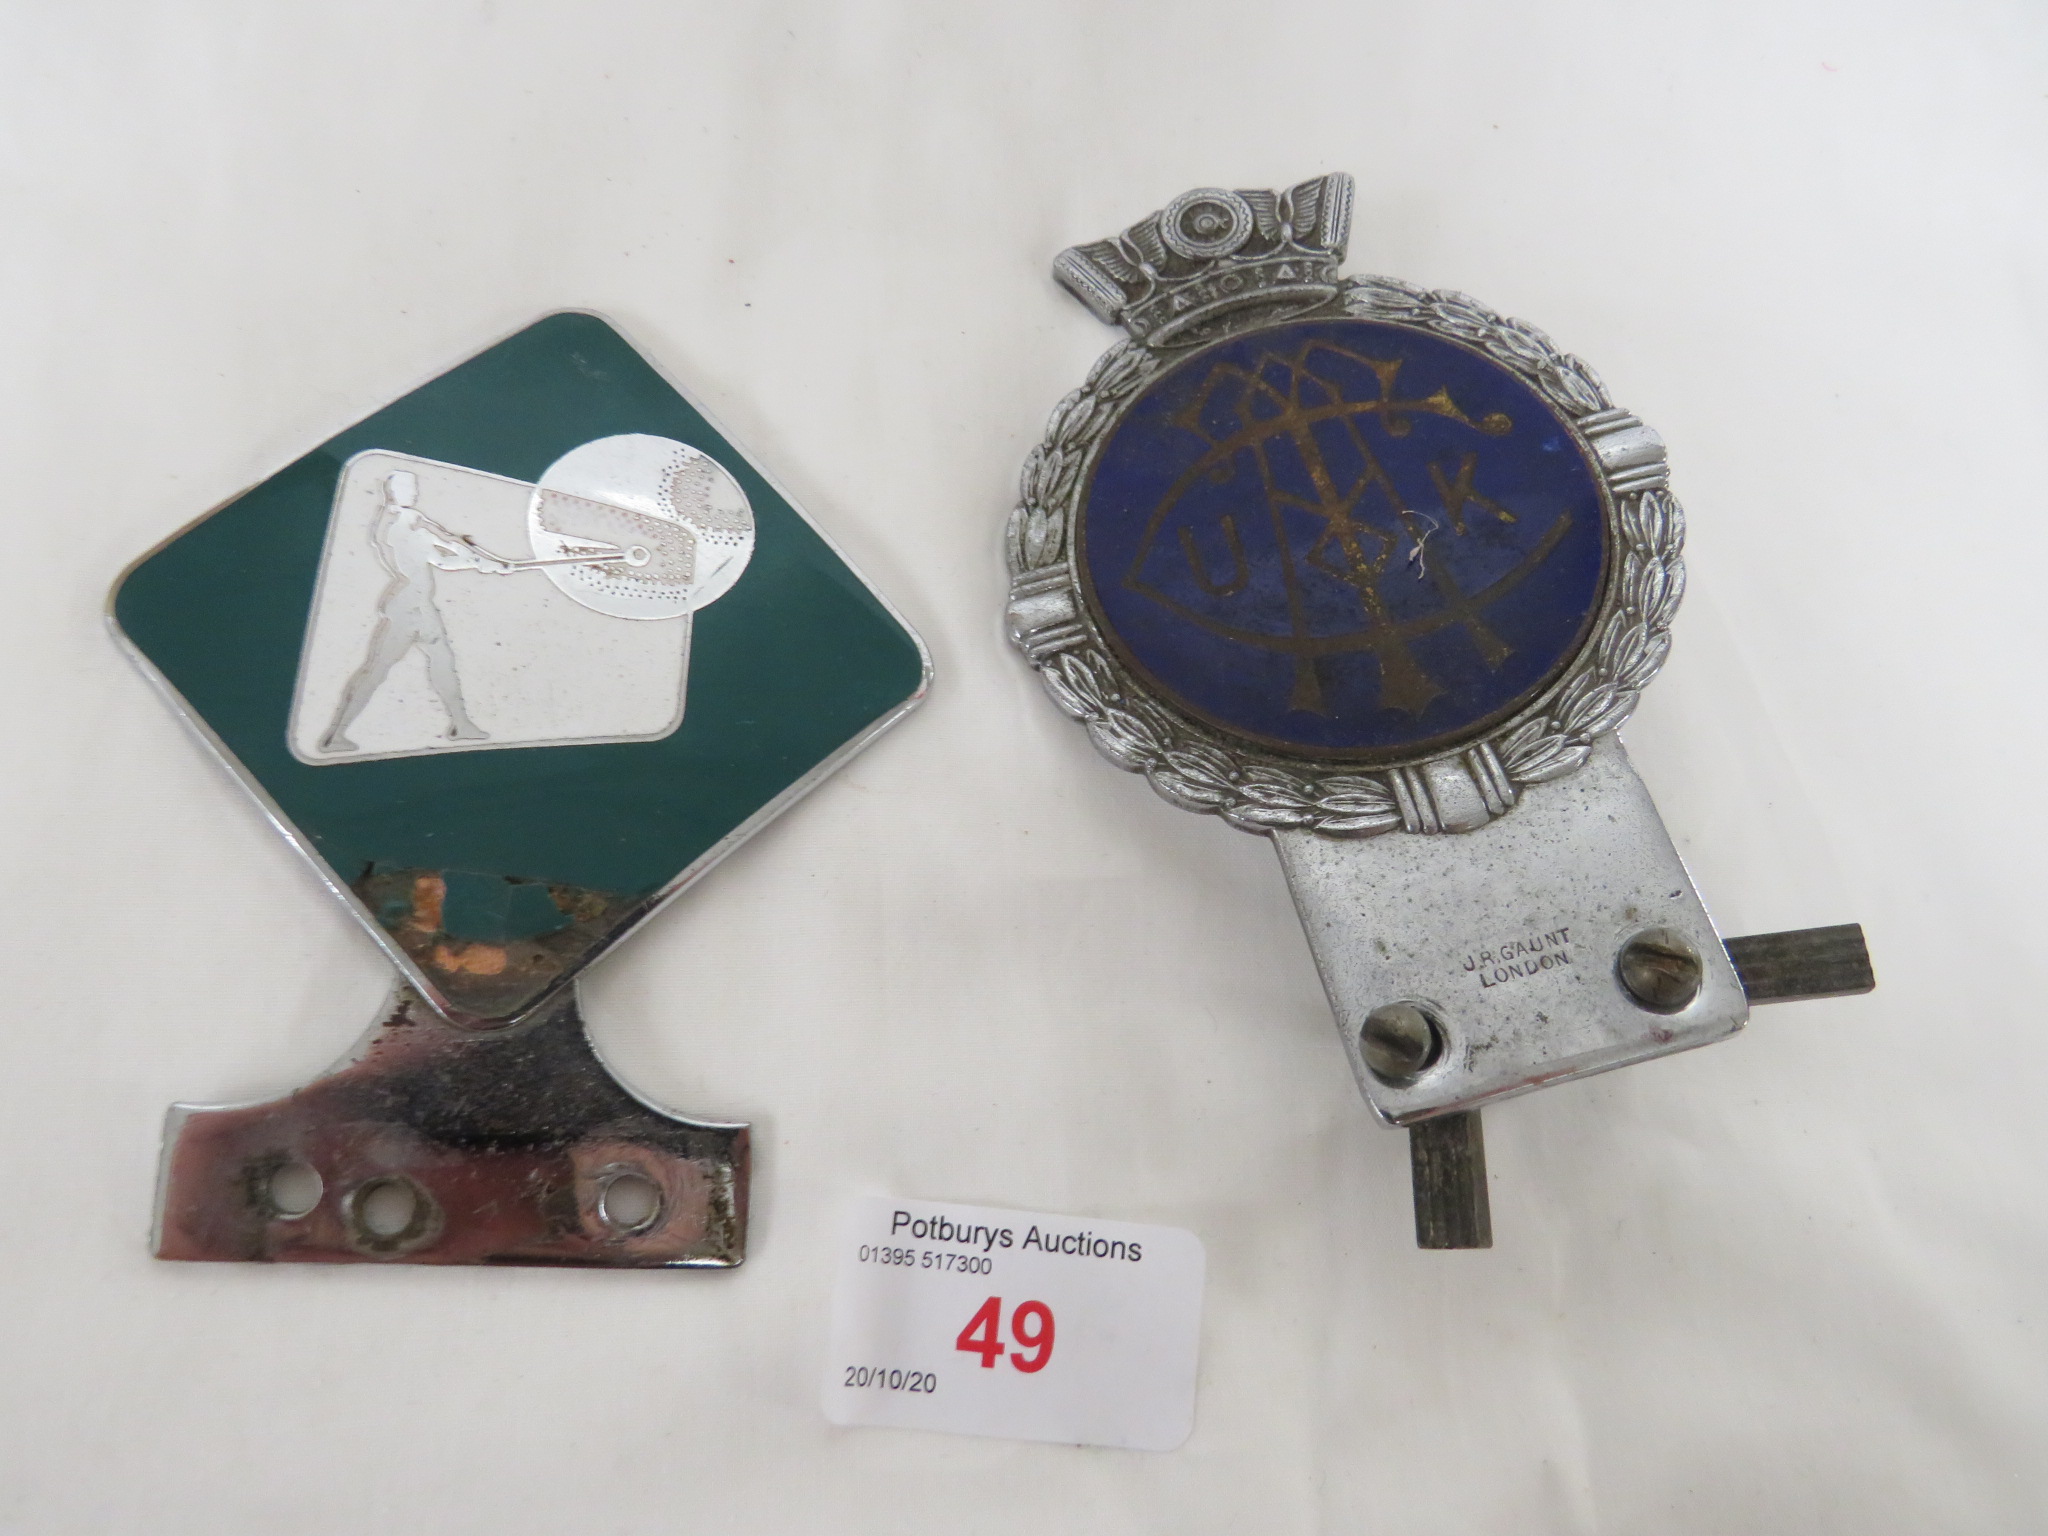 RANK CAR BADGE AND ONE OTHER CAR J R GAUNT CAR BADGE WITH INITIALS